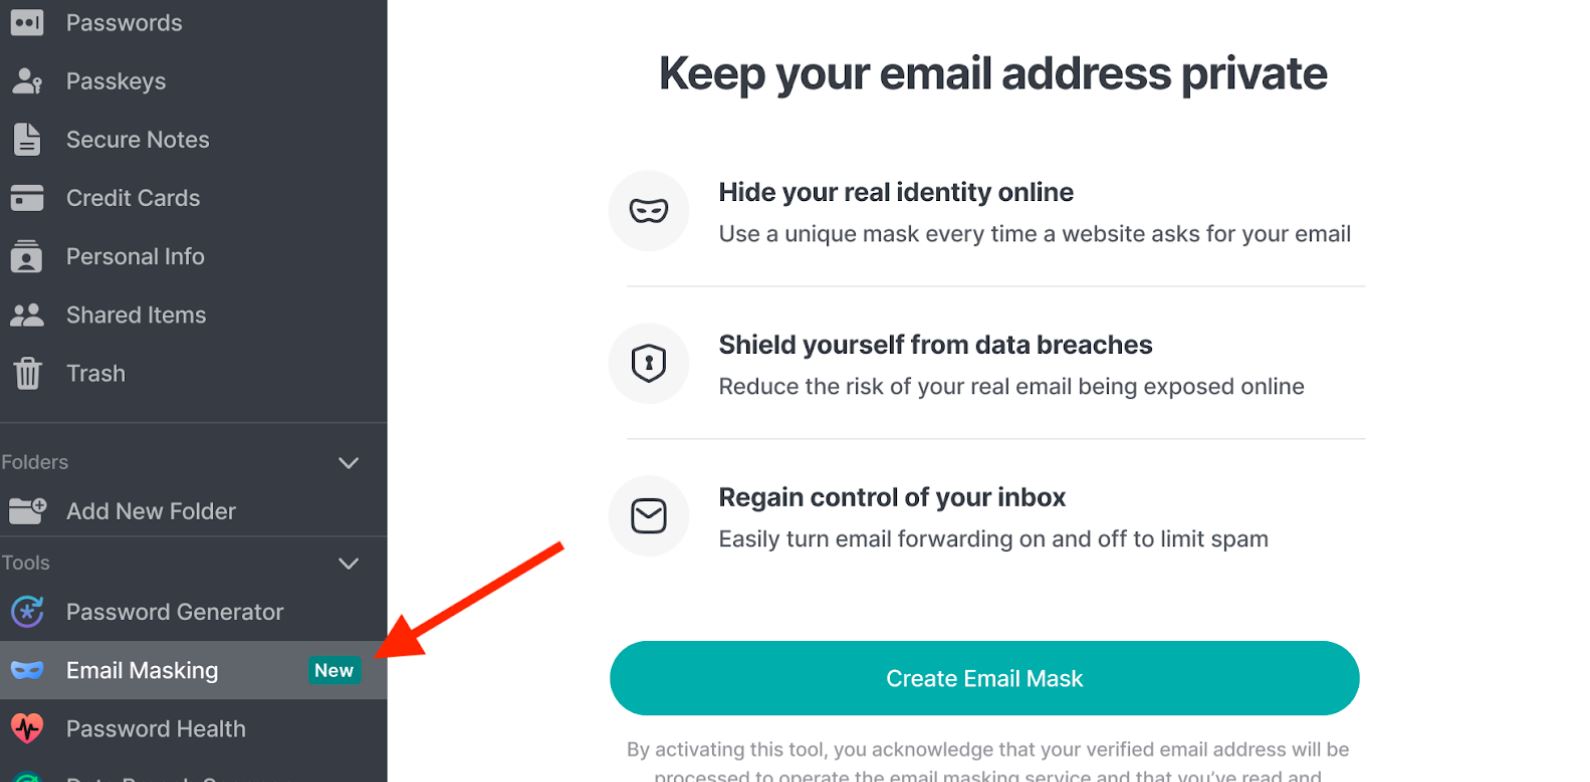 NordPass Email Masking feature